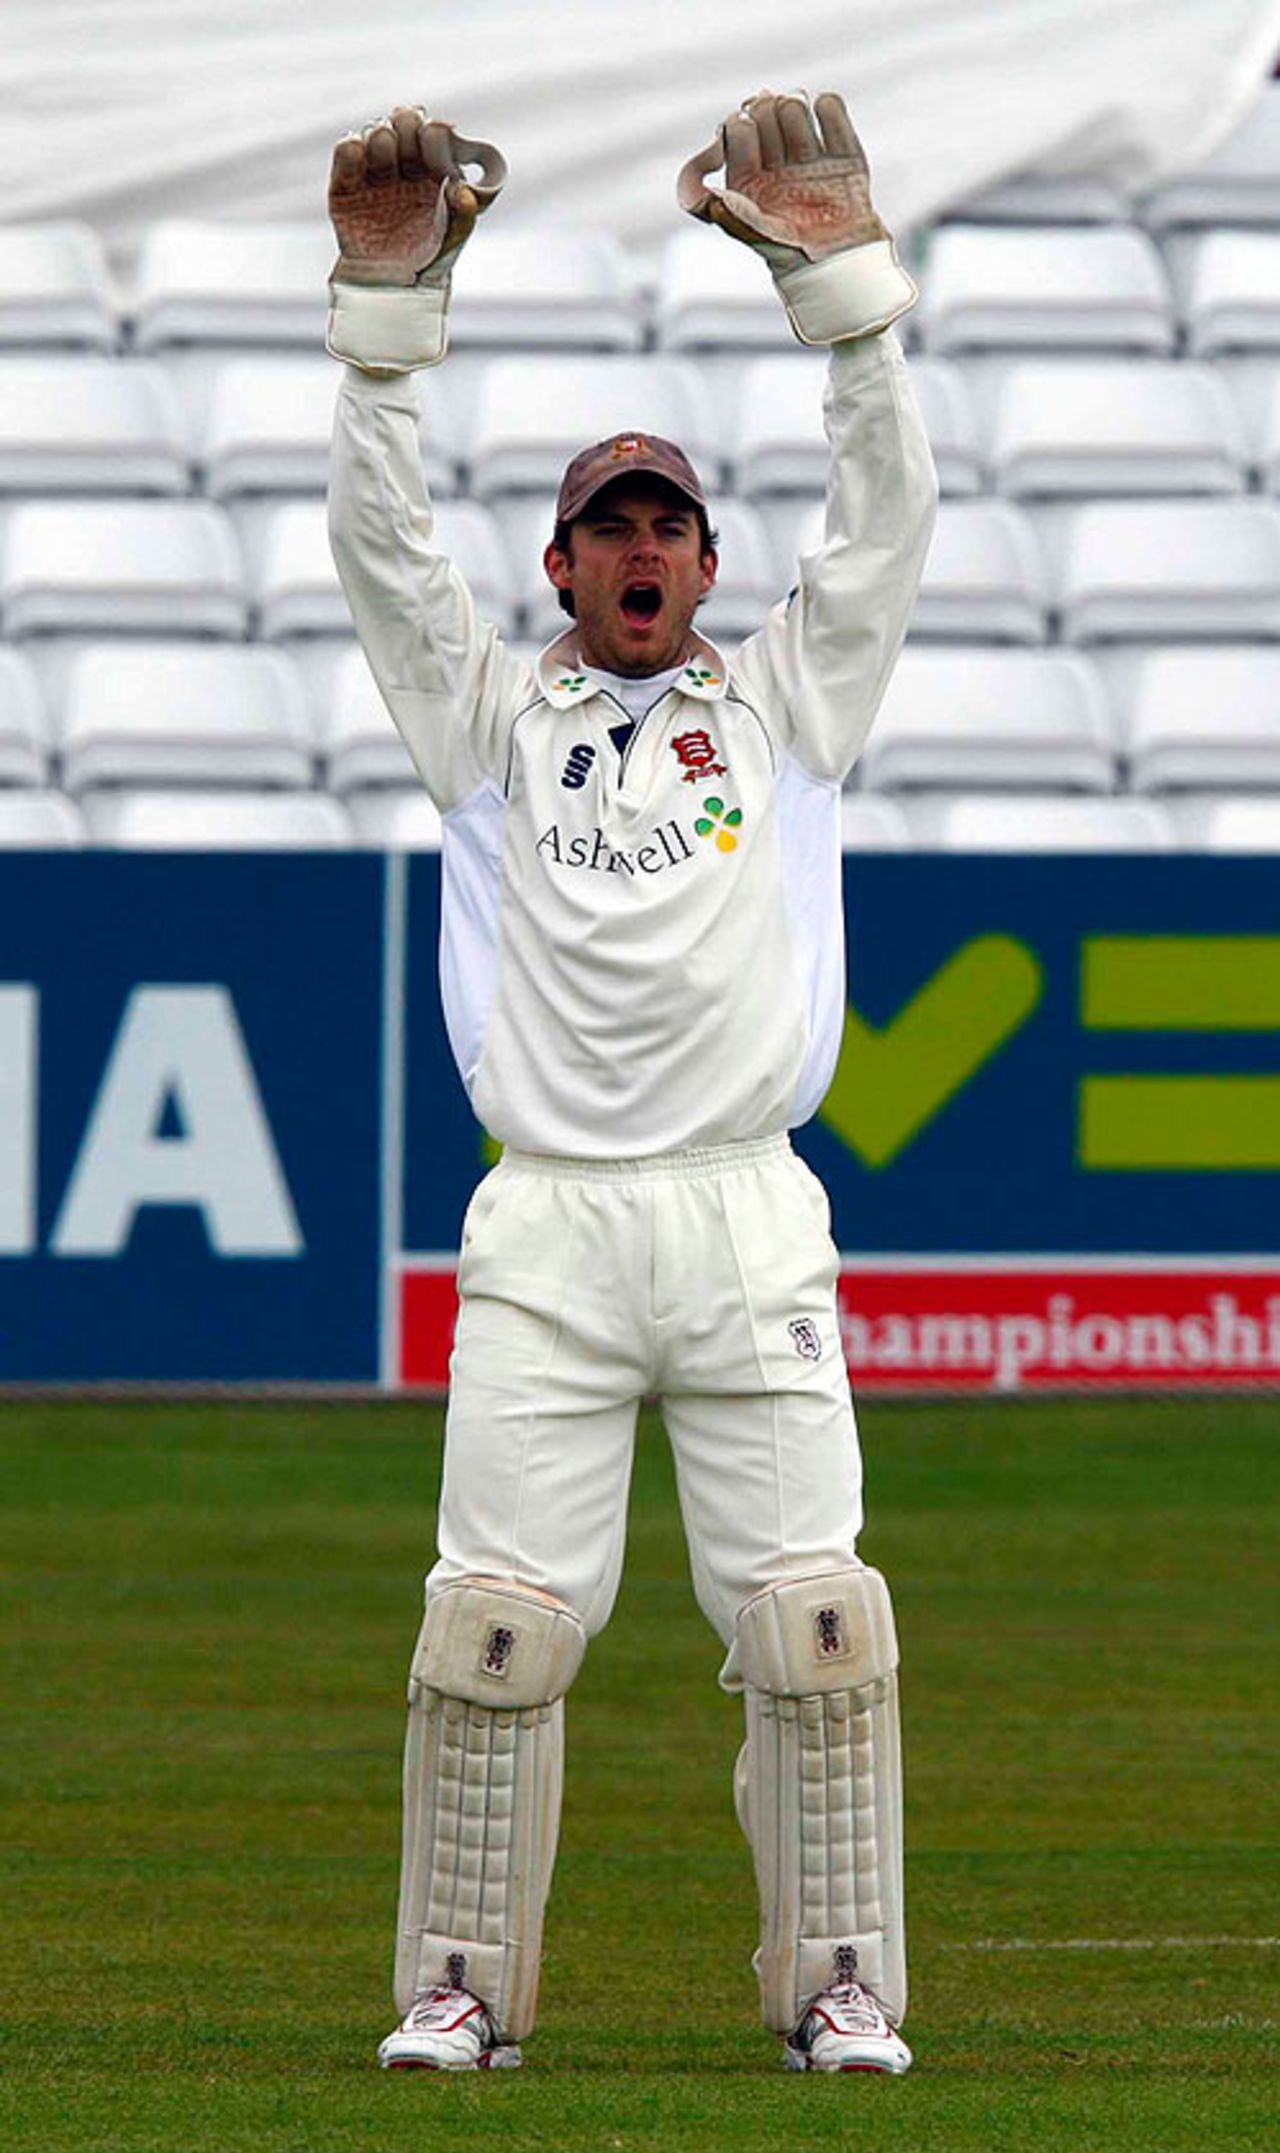 James Foster appeals during Essex's opening Championship fixture against Northants at Chelmsford